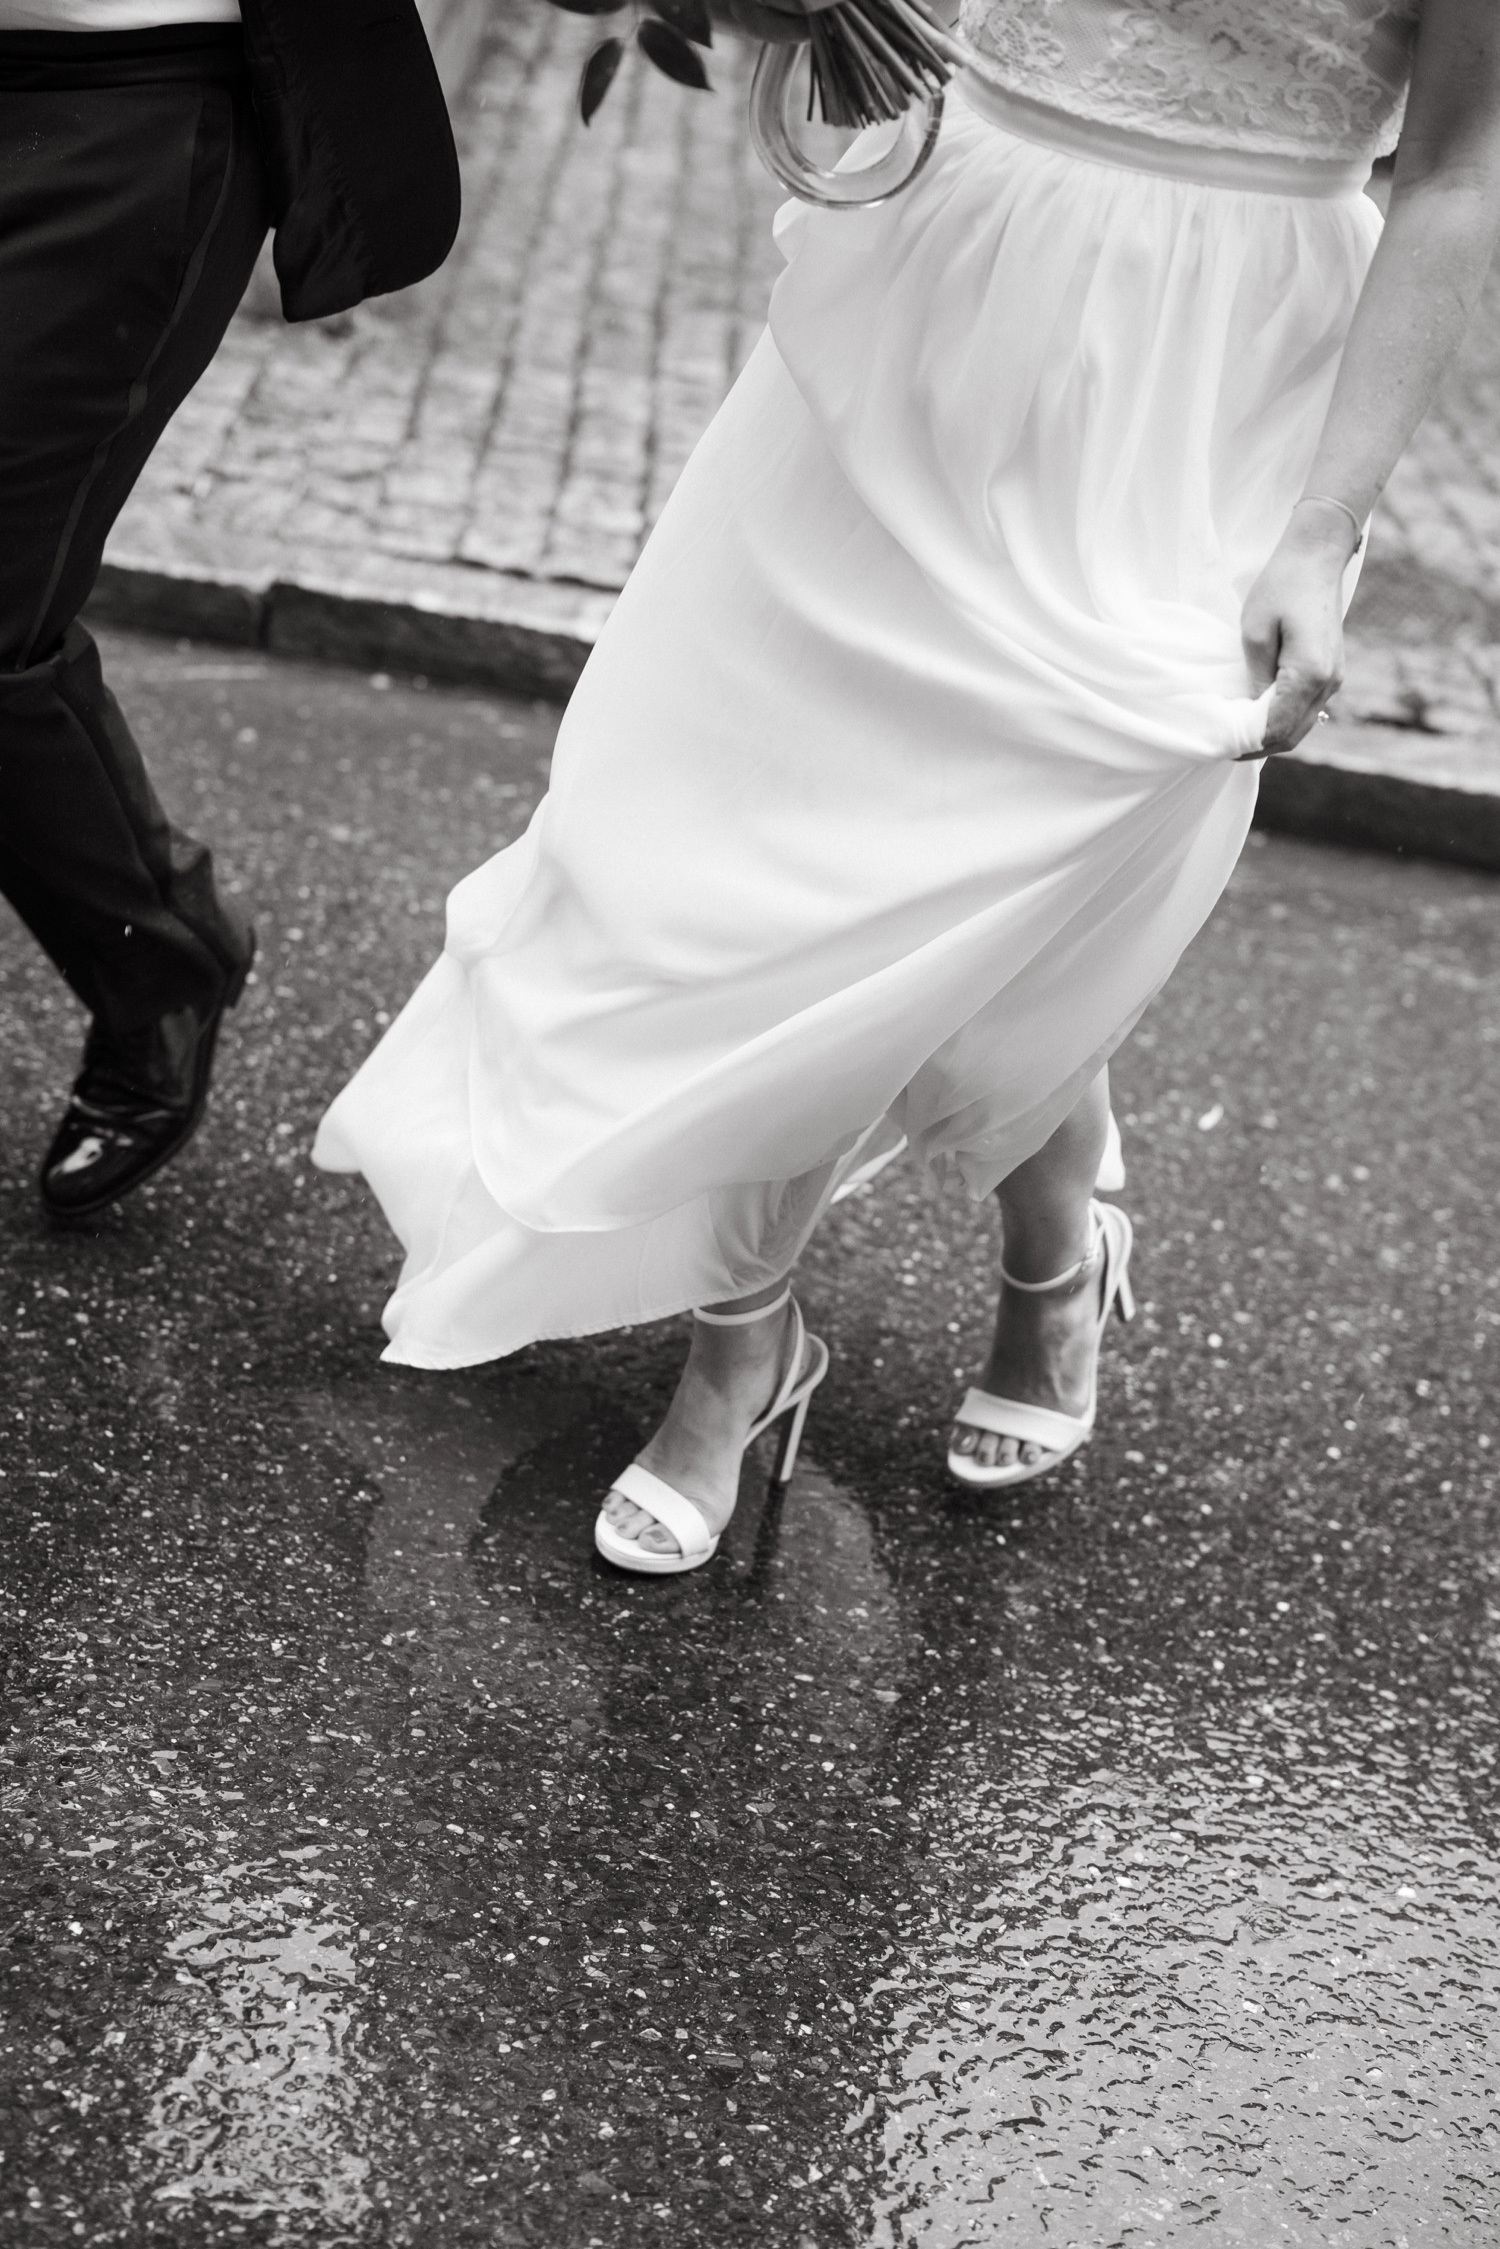 weddign shoe detail pic rainy day bride and groom walking motion shot